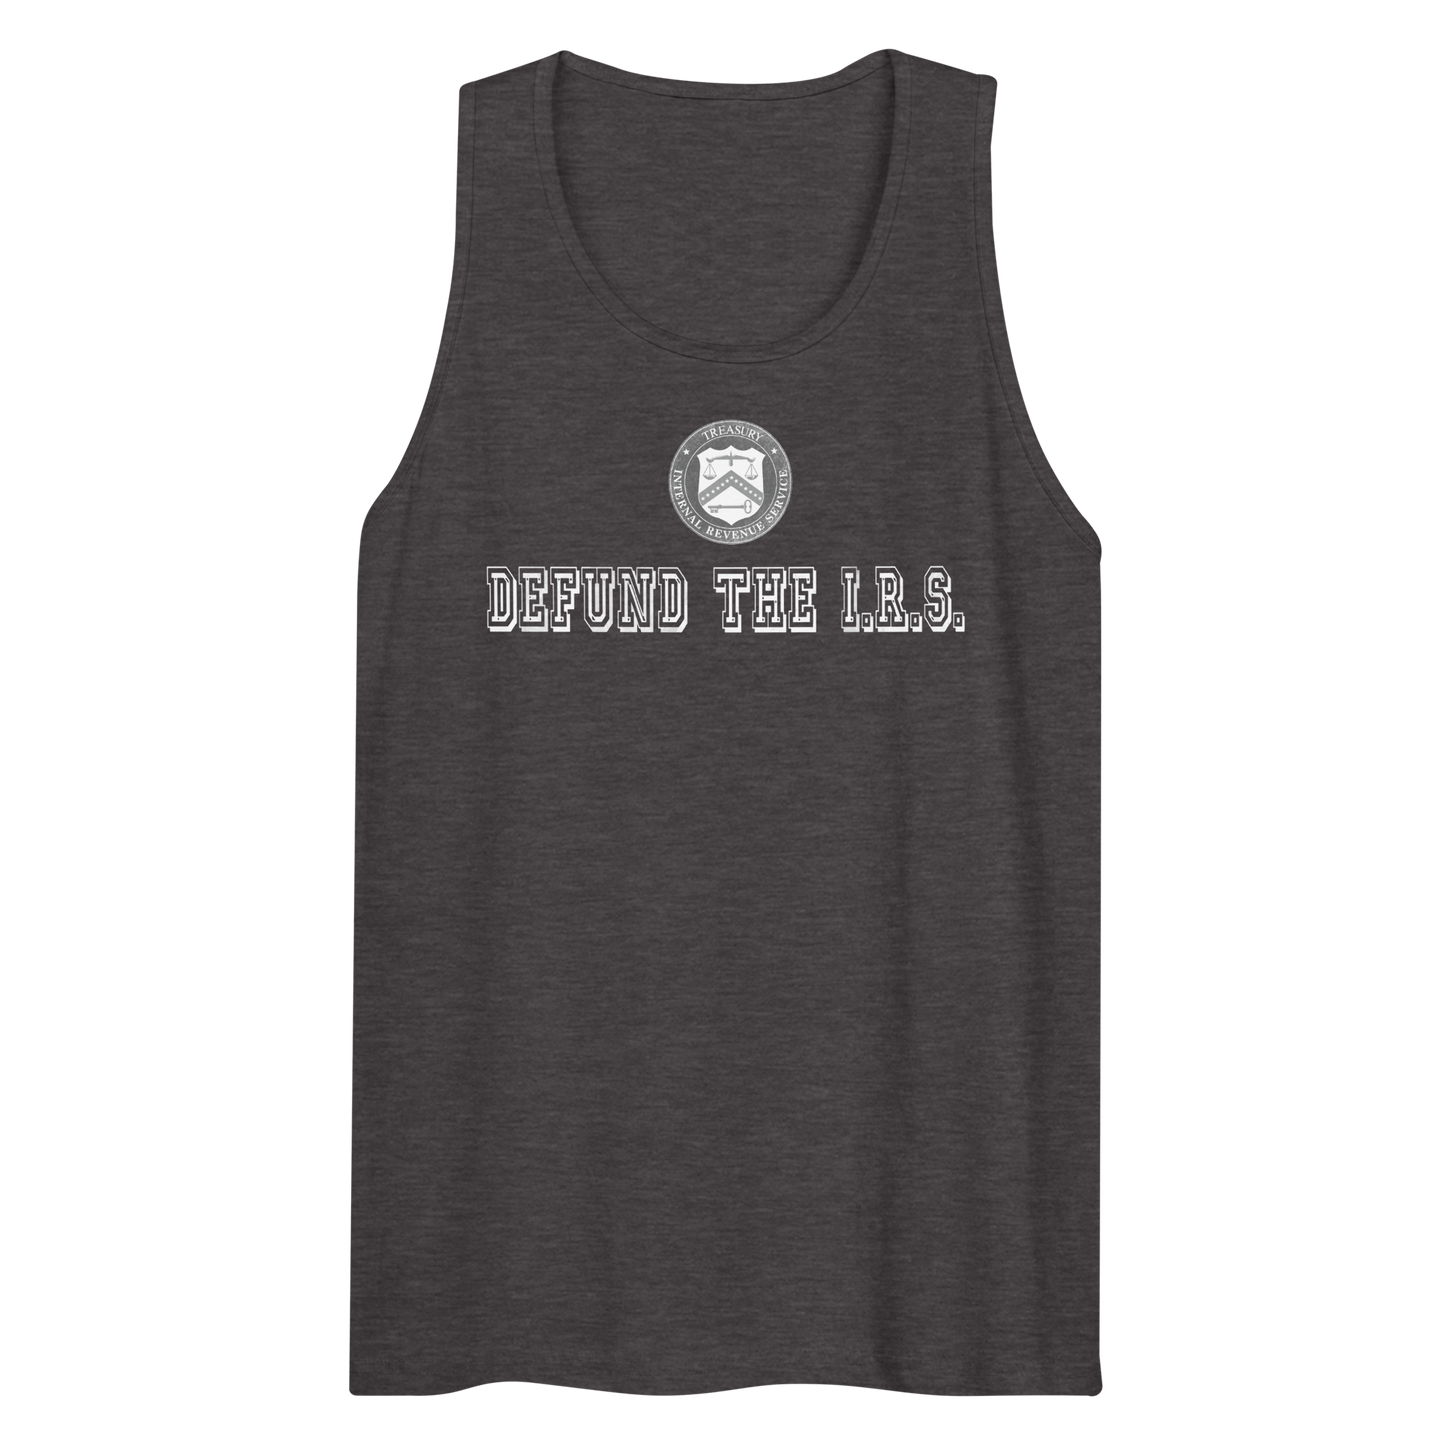 Defund the I.R.S. Tank Top